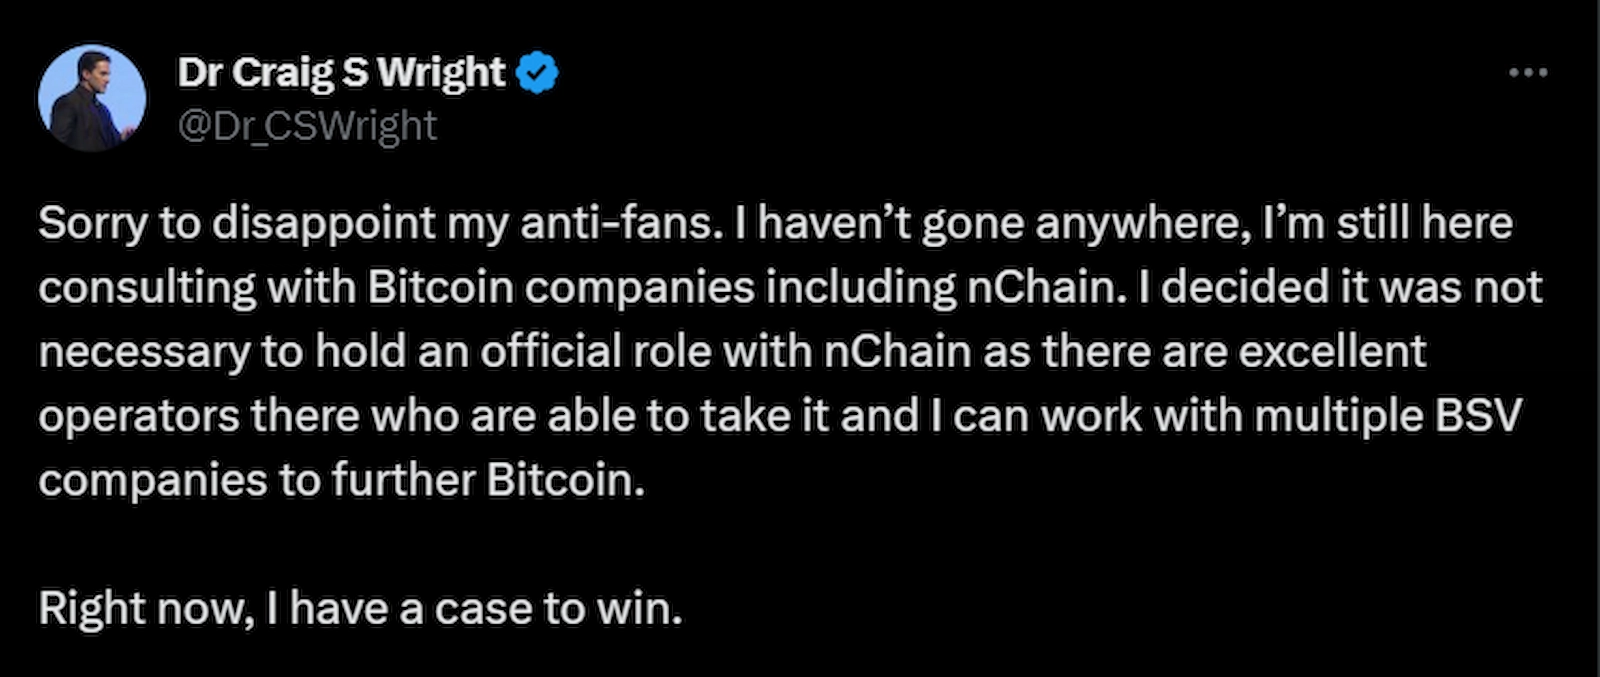 Wright assured his followers he would stay in his role at nChain